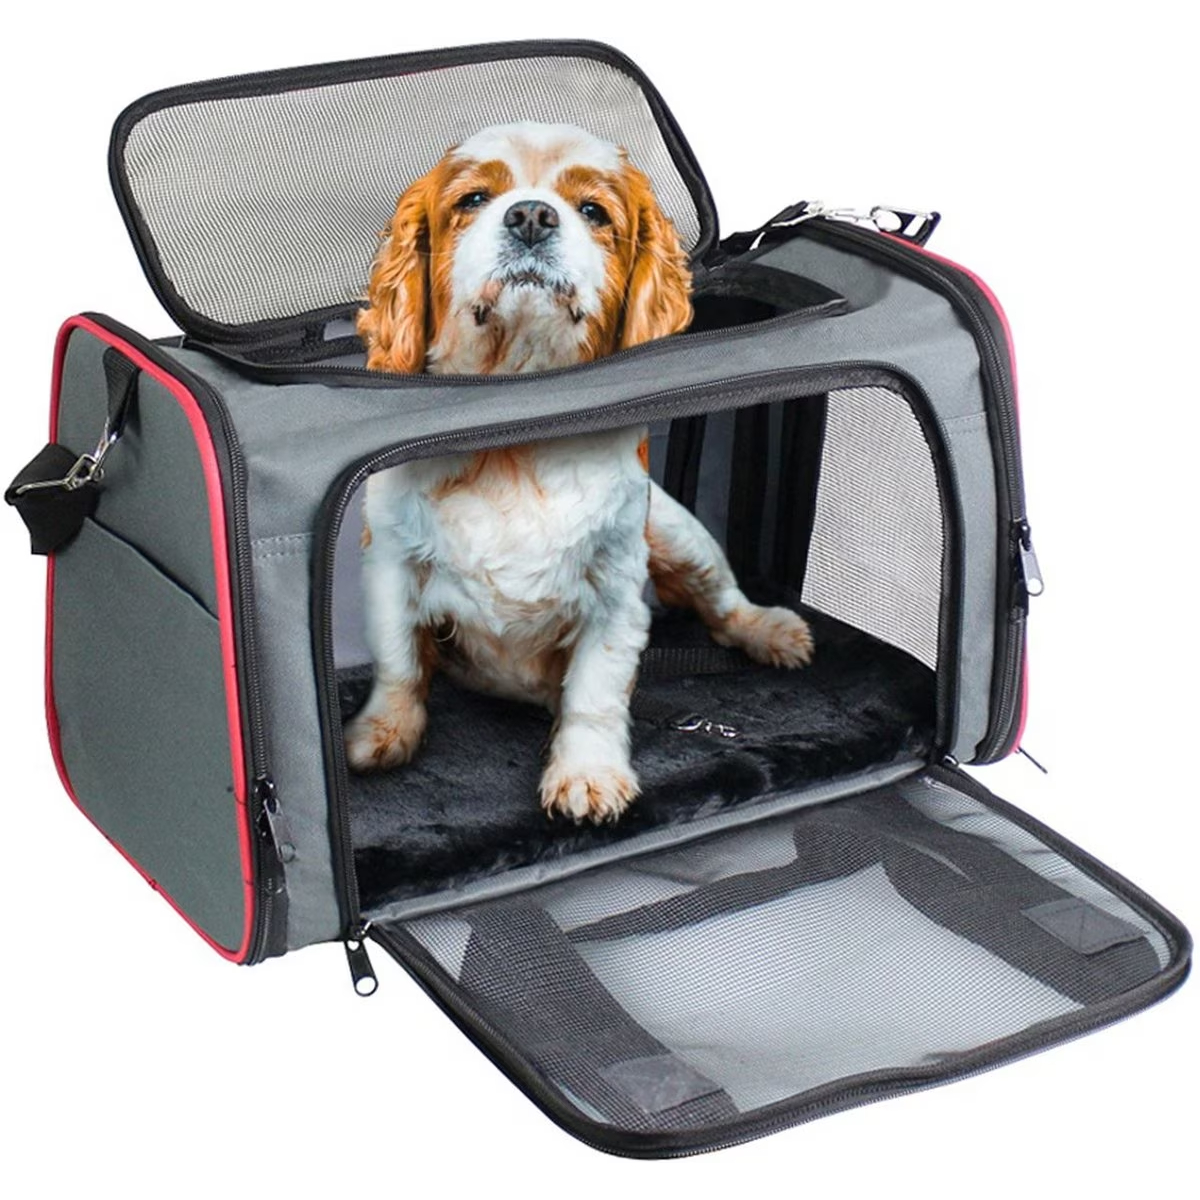 Jespet Soft-Sided Airline-Approved Travel Dog & Cat Carrier new